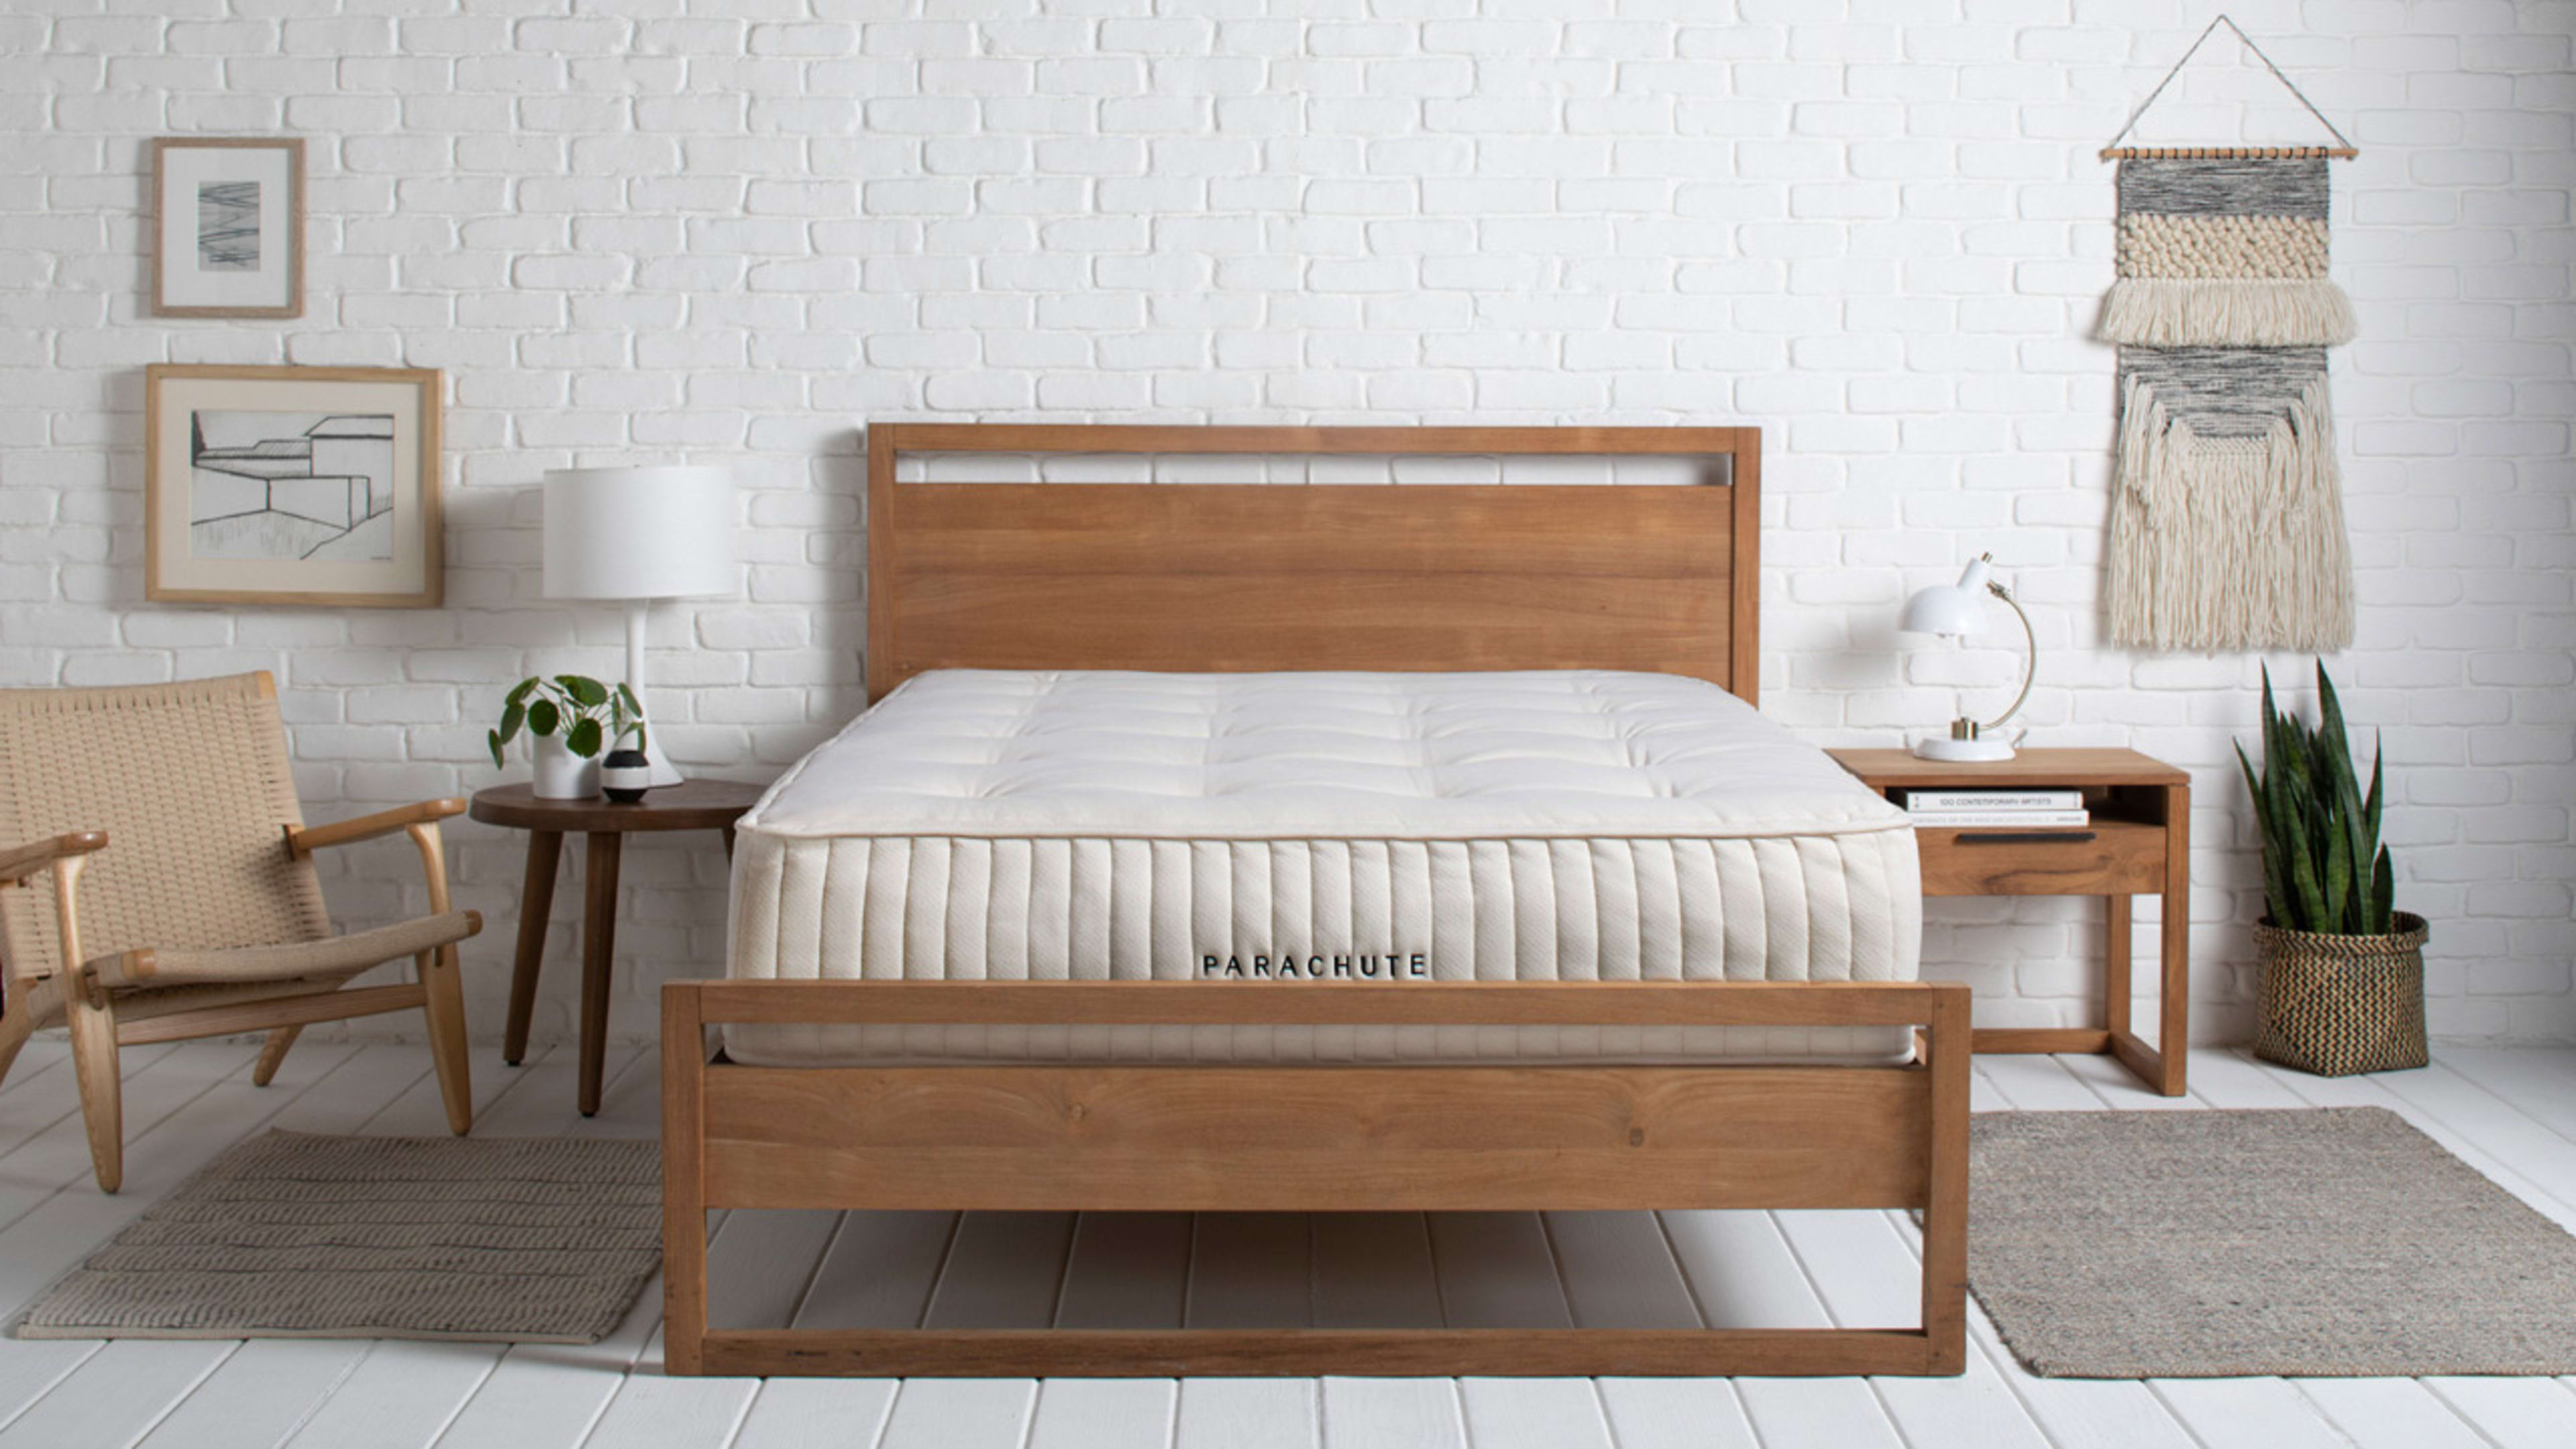 Cult bedsheet startup Parachute is getting into the mattress game